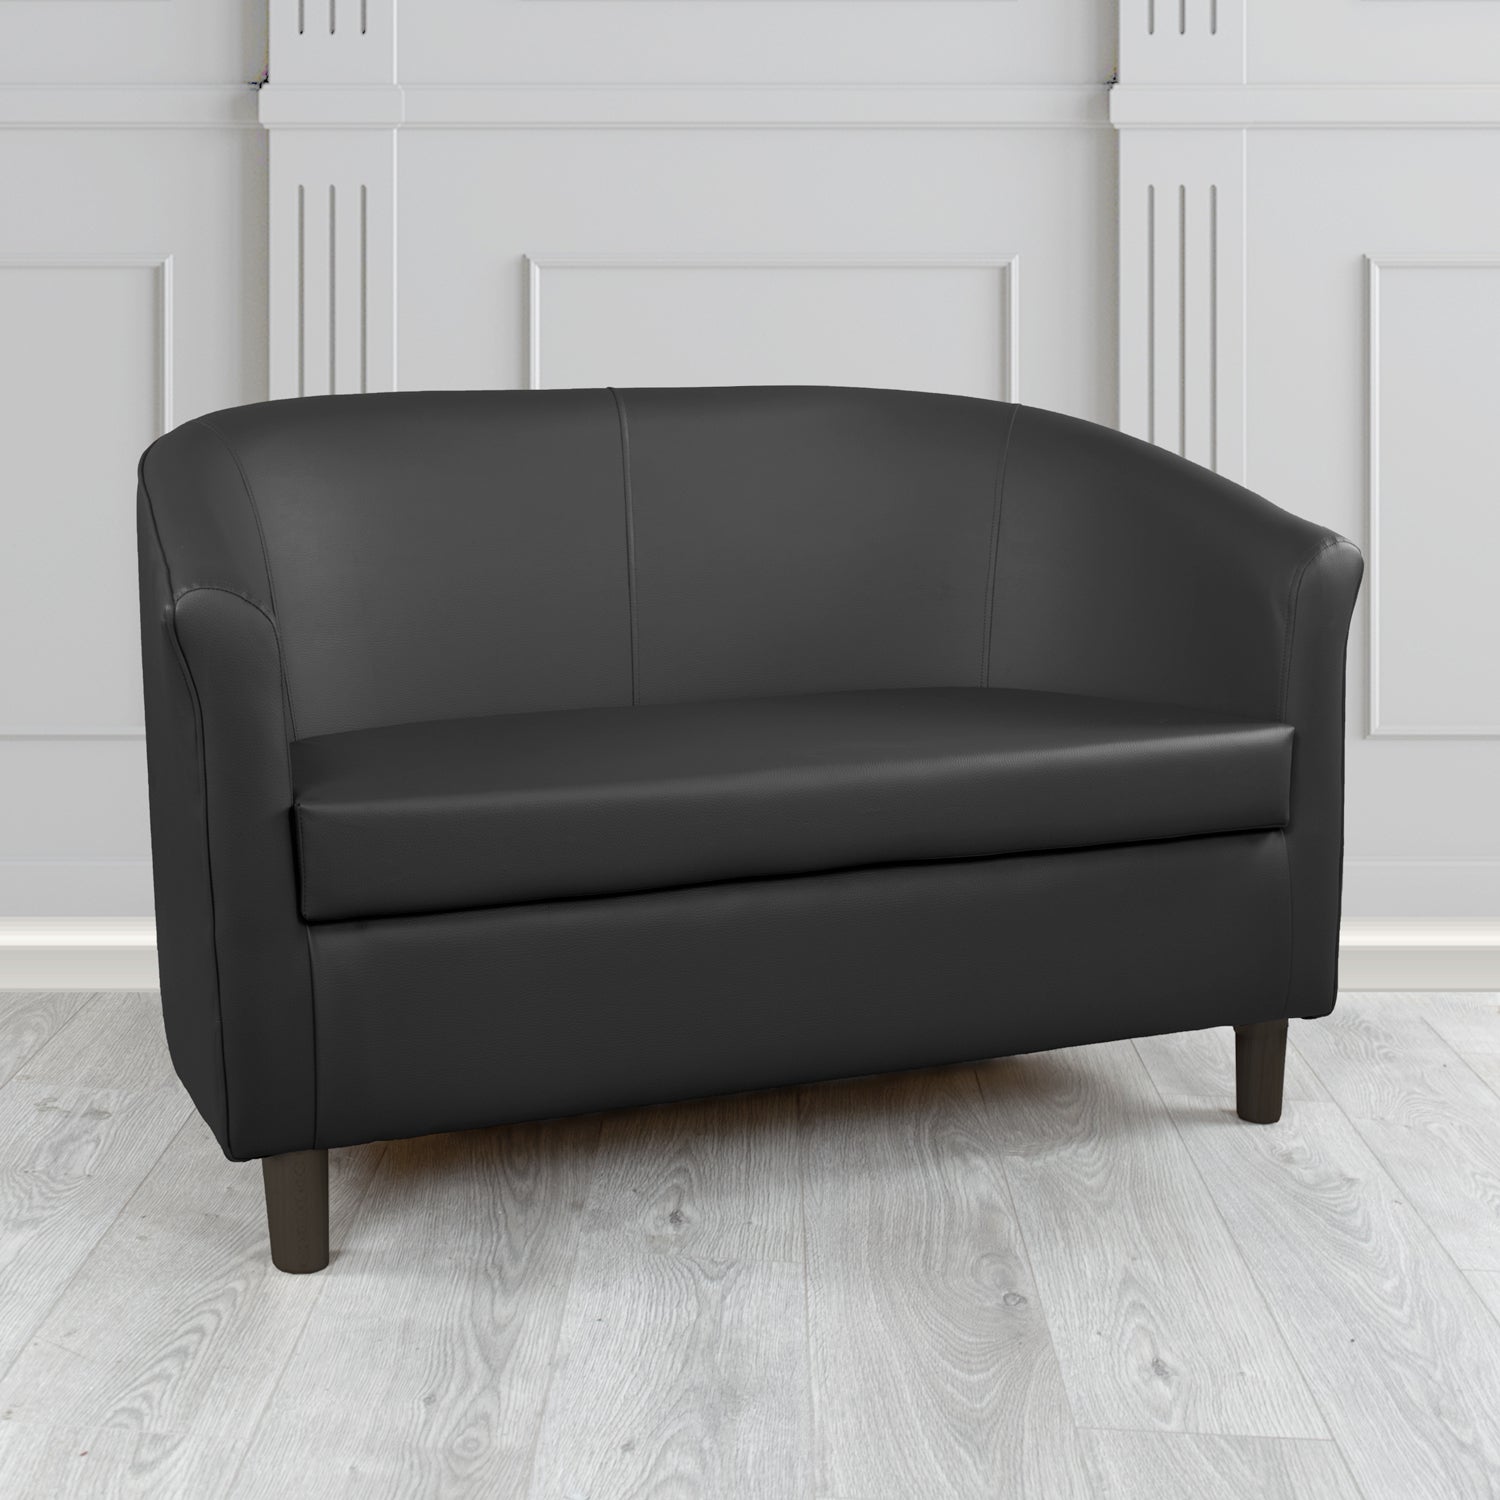 Tuscany 2 Seater Tub Sofa in Madrid Black Faux Leather - The Tub Chair Shop